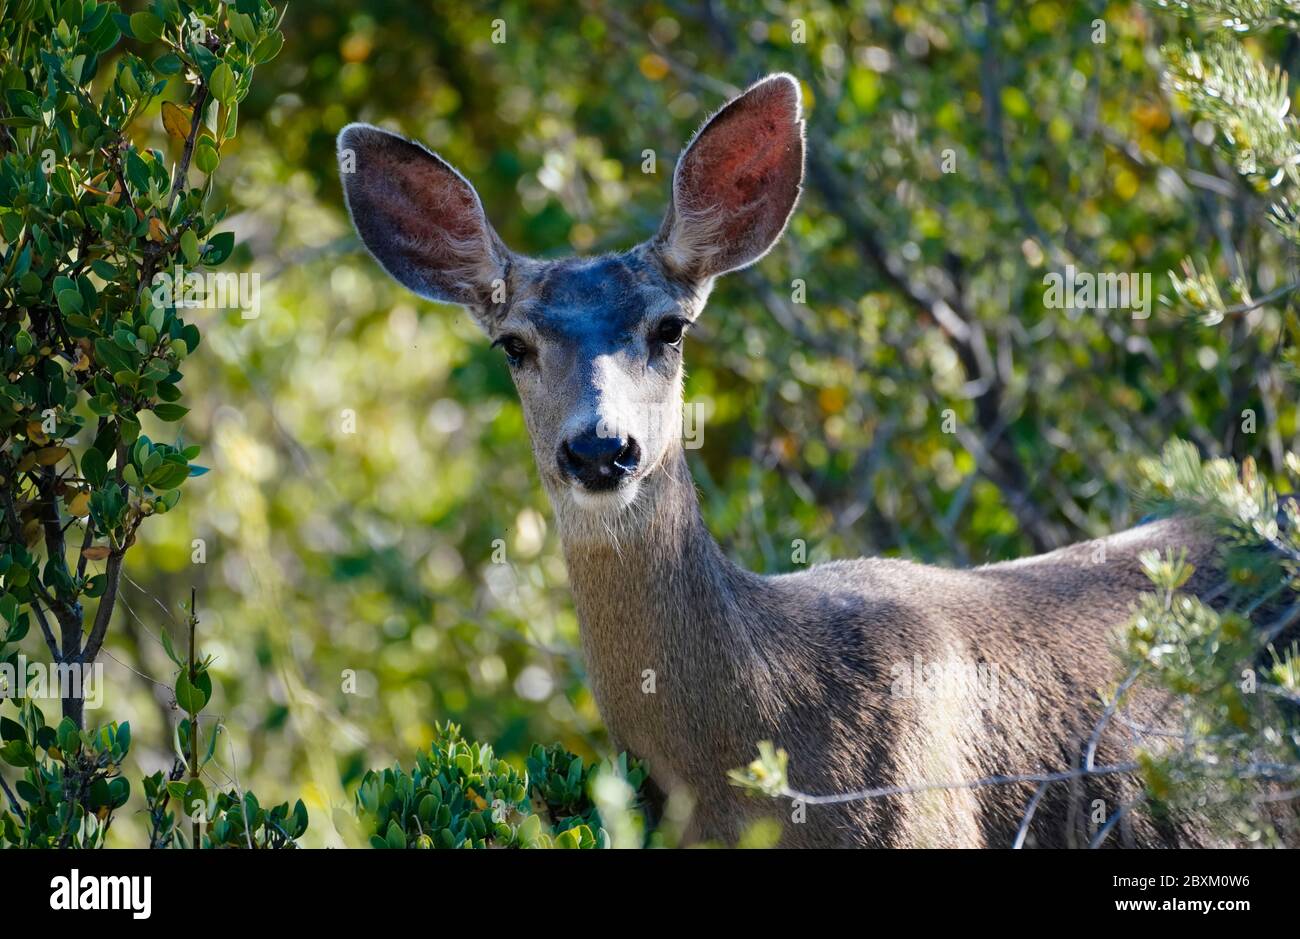 Close up of a Mule Deer Doe in a forest setting, looking at the camera. Stock Photo